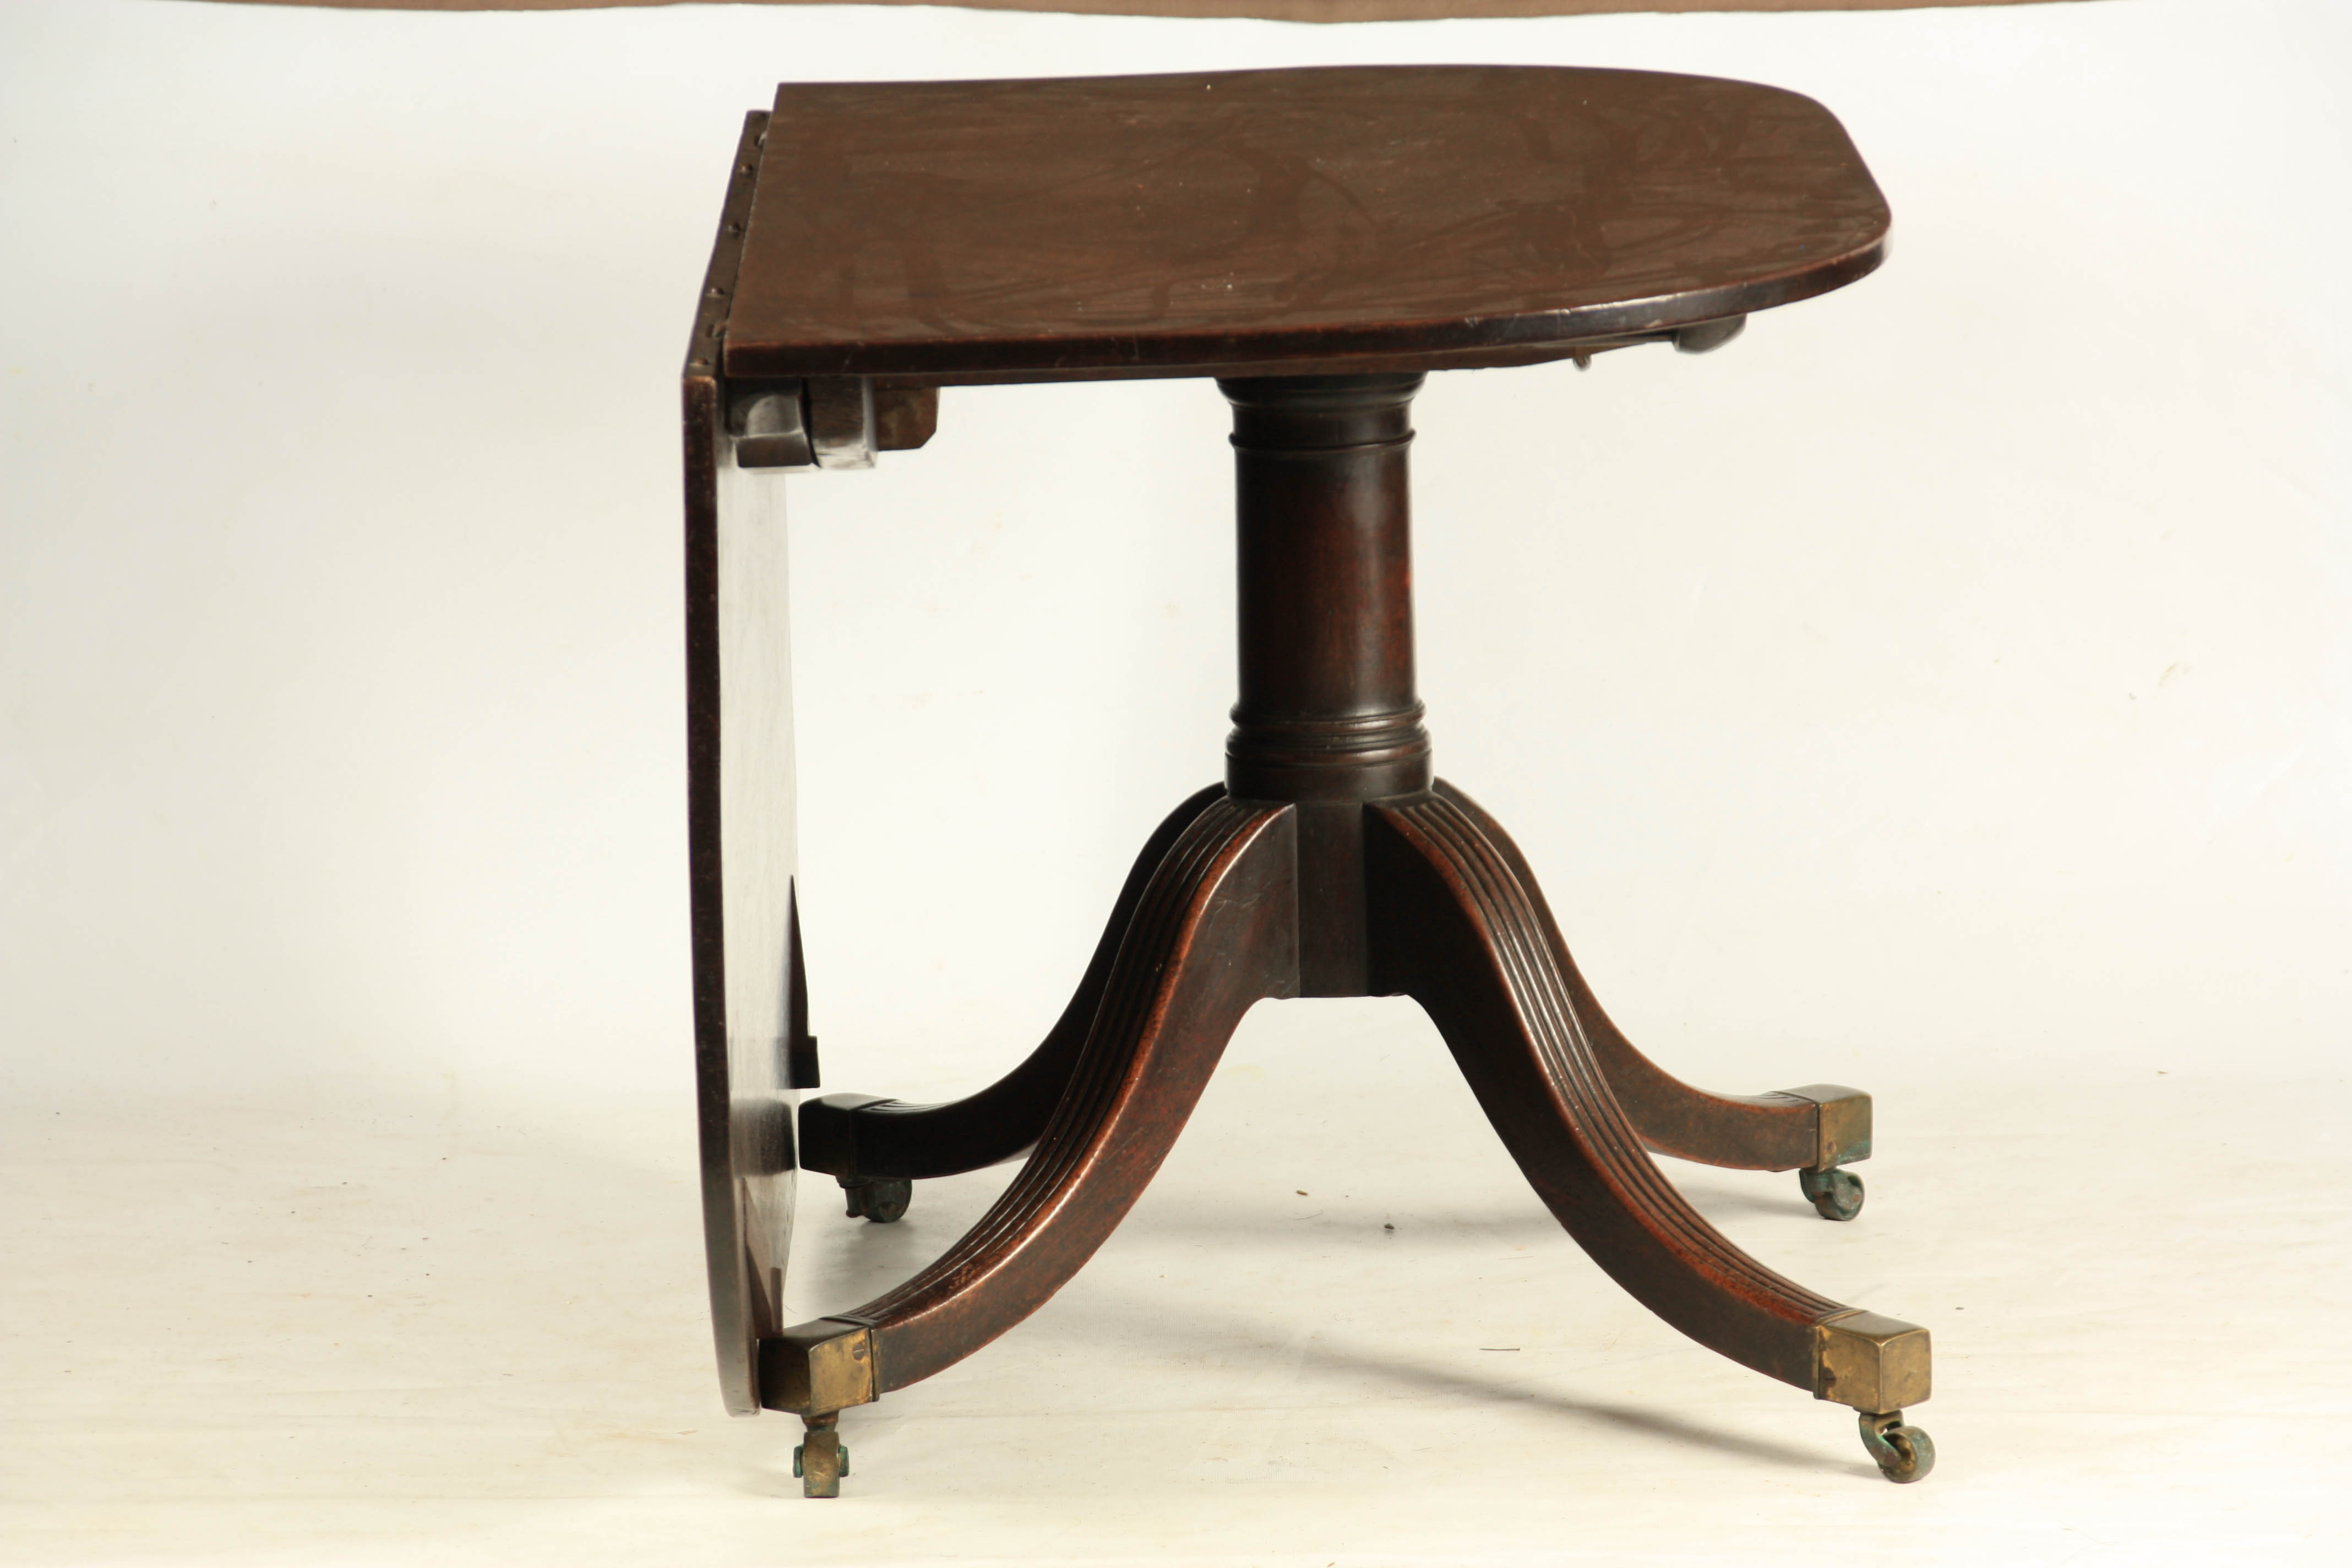 AN UNUSUAL MID 18TH CENTURY DROP LEAF PEDESTAL DINING TABLE with two-section top one being - Image 8 of 12